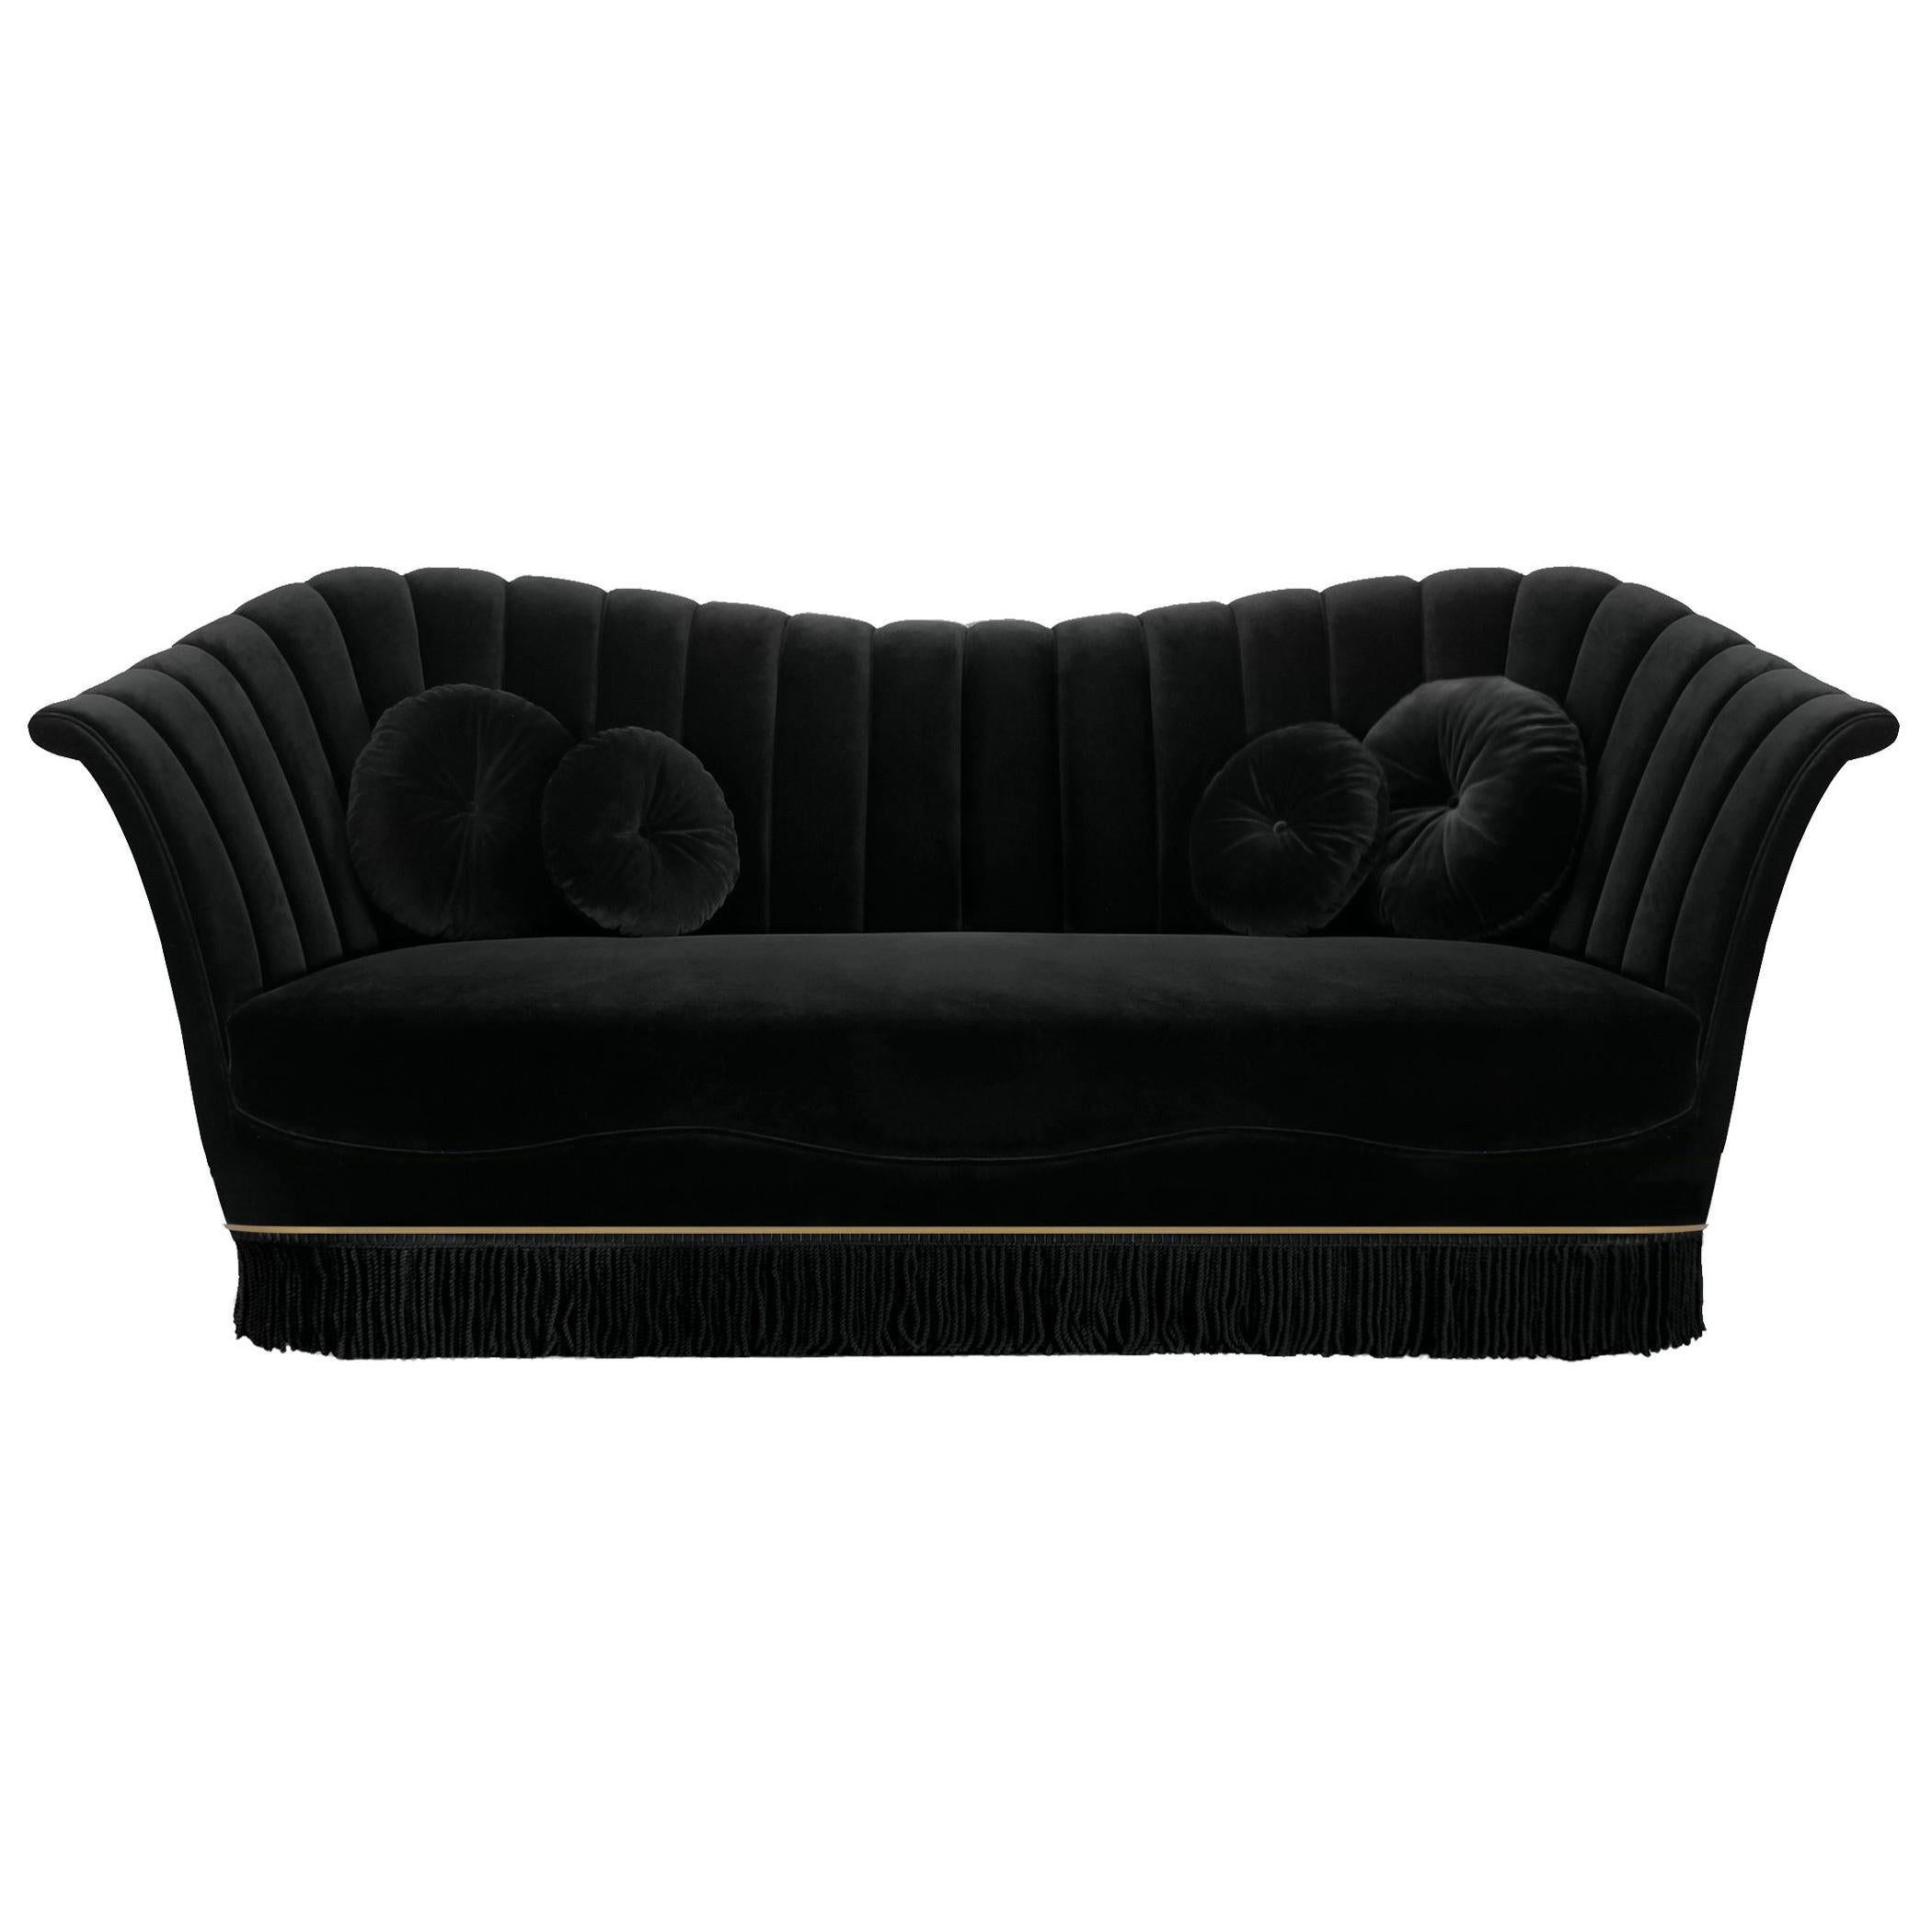 Flirty and unpredictable like a modern woman, the Caprichosa voluptuous sofa design mimics a woman’s most desirable curves. Fitted like a little black dress in delicious upholstery fabric with a fringed skirt.

Options
Upholstery: Available in any